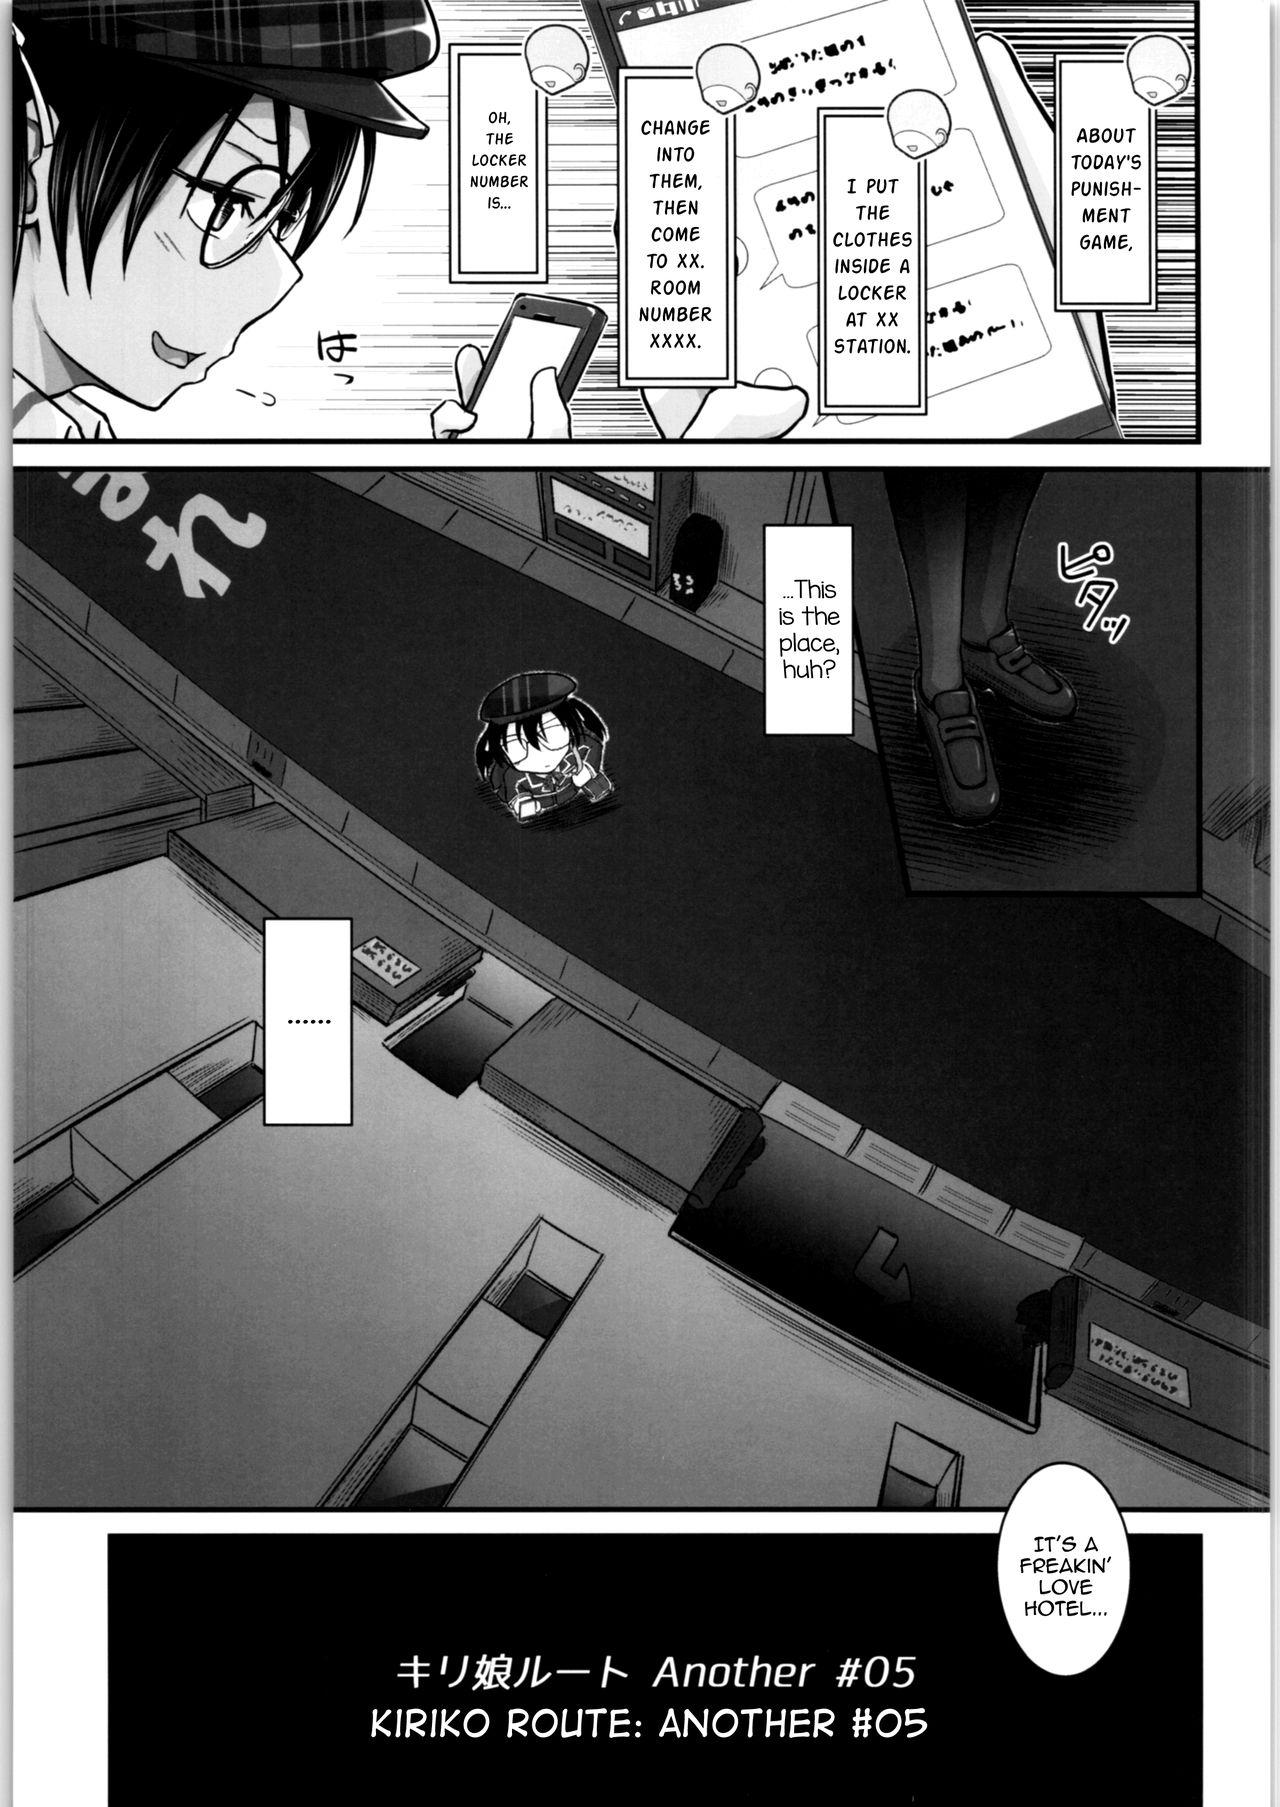 Punishment Kiriko Route Another #05 - Sword art online Old Vs Young - Page 4